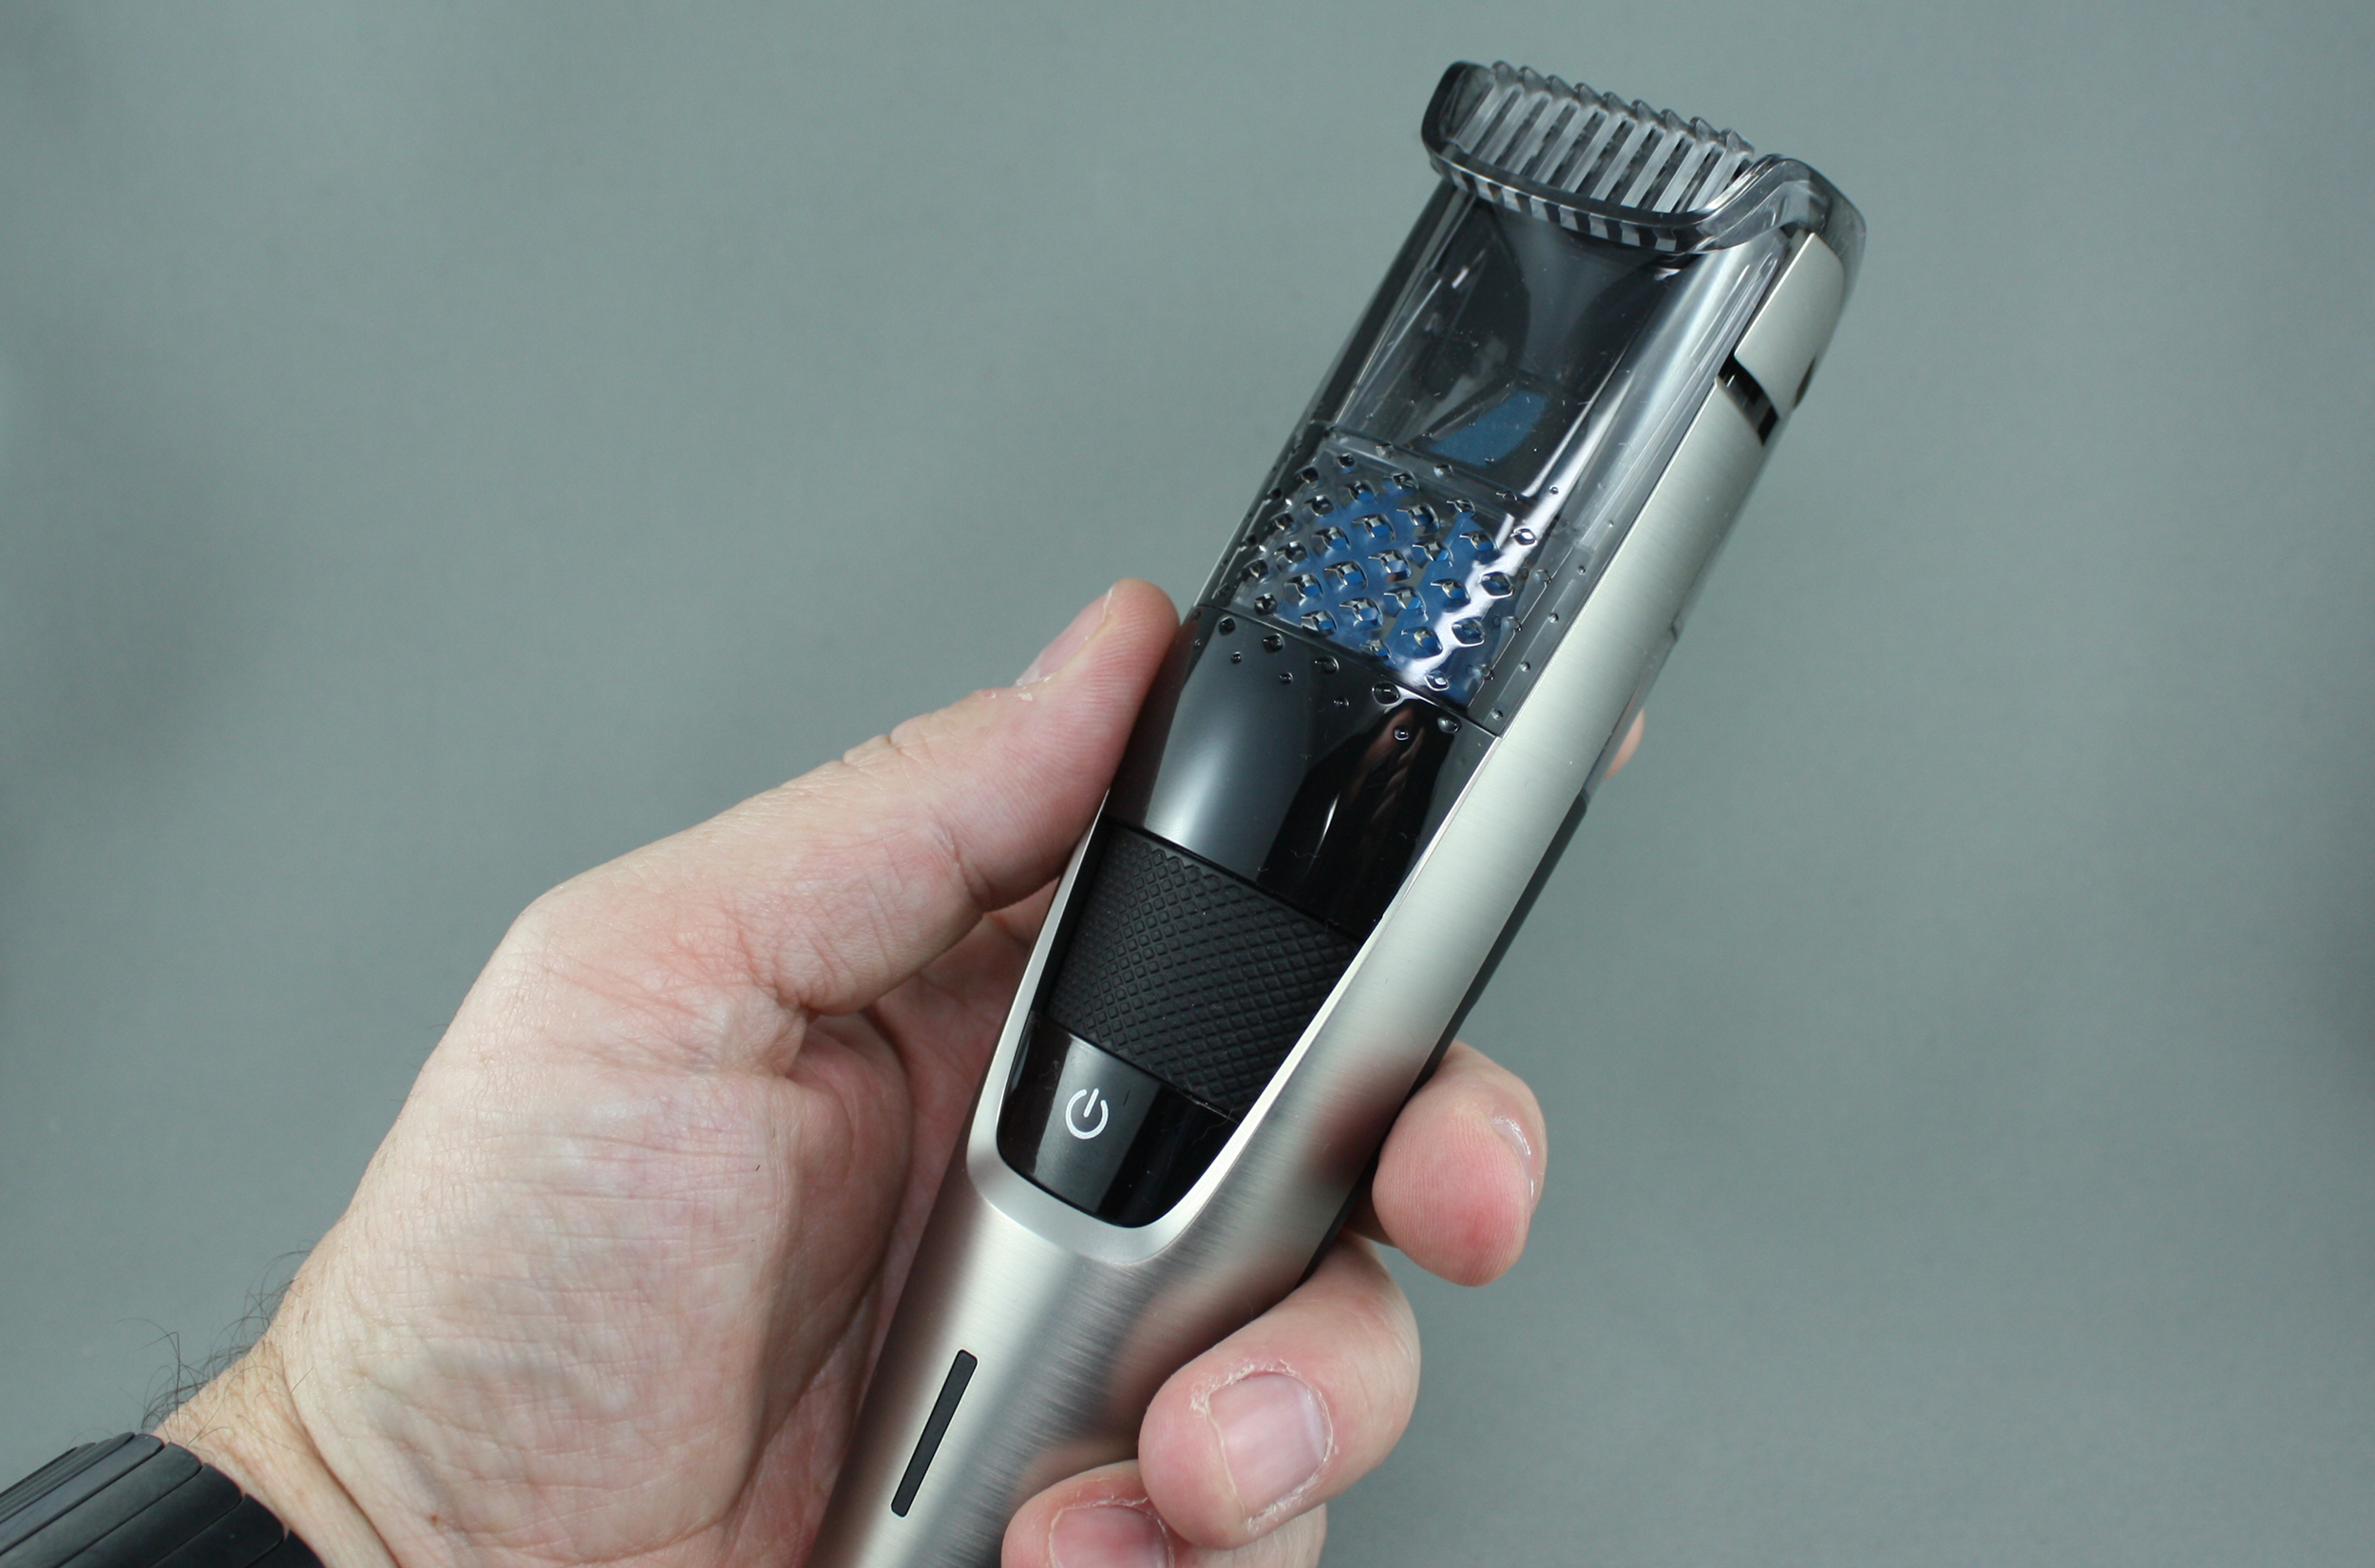 philips 7000 beard trimmer review